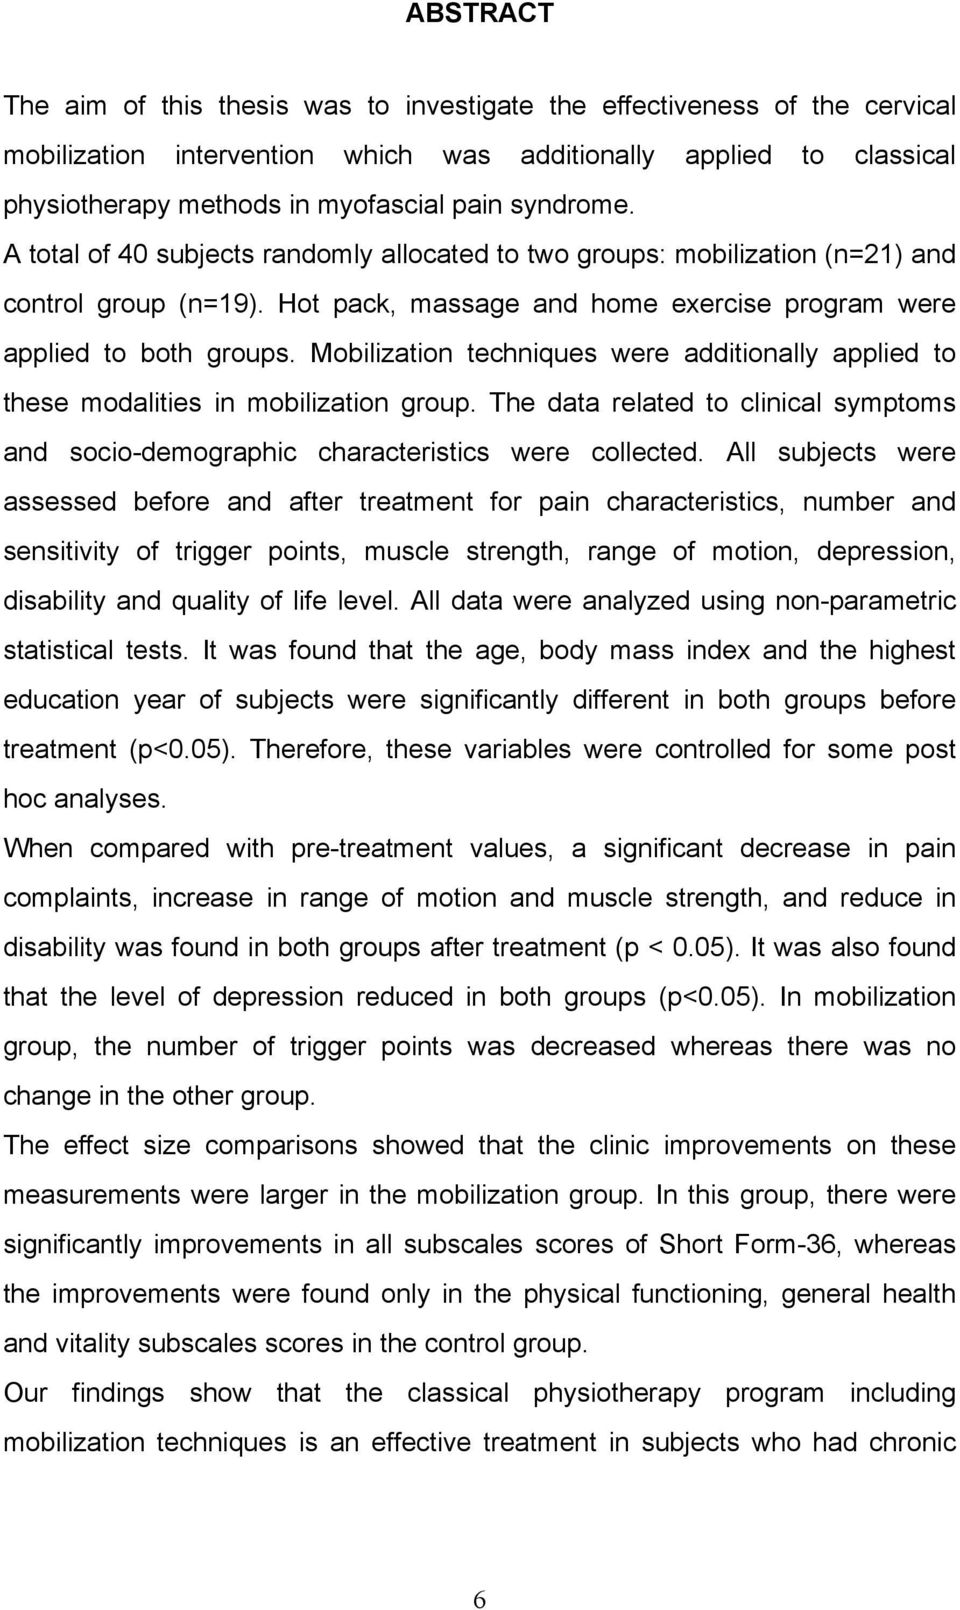 Mobilization techniques were additionally applied to these modalities in mobilization group. The data related to clinical symptoms and socio-demographic characteristics were collected.